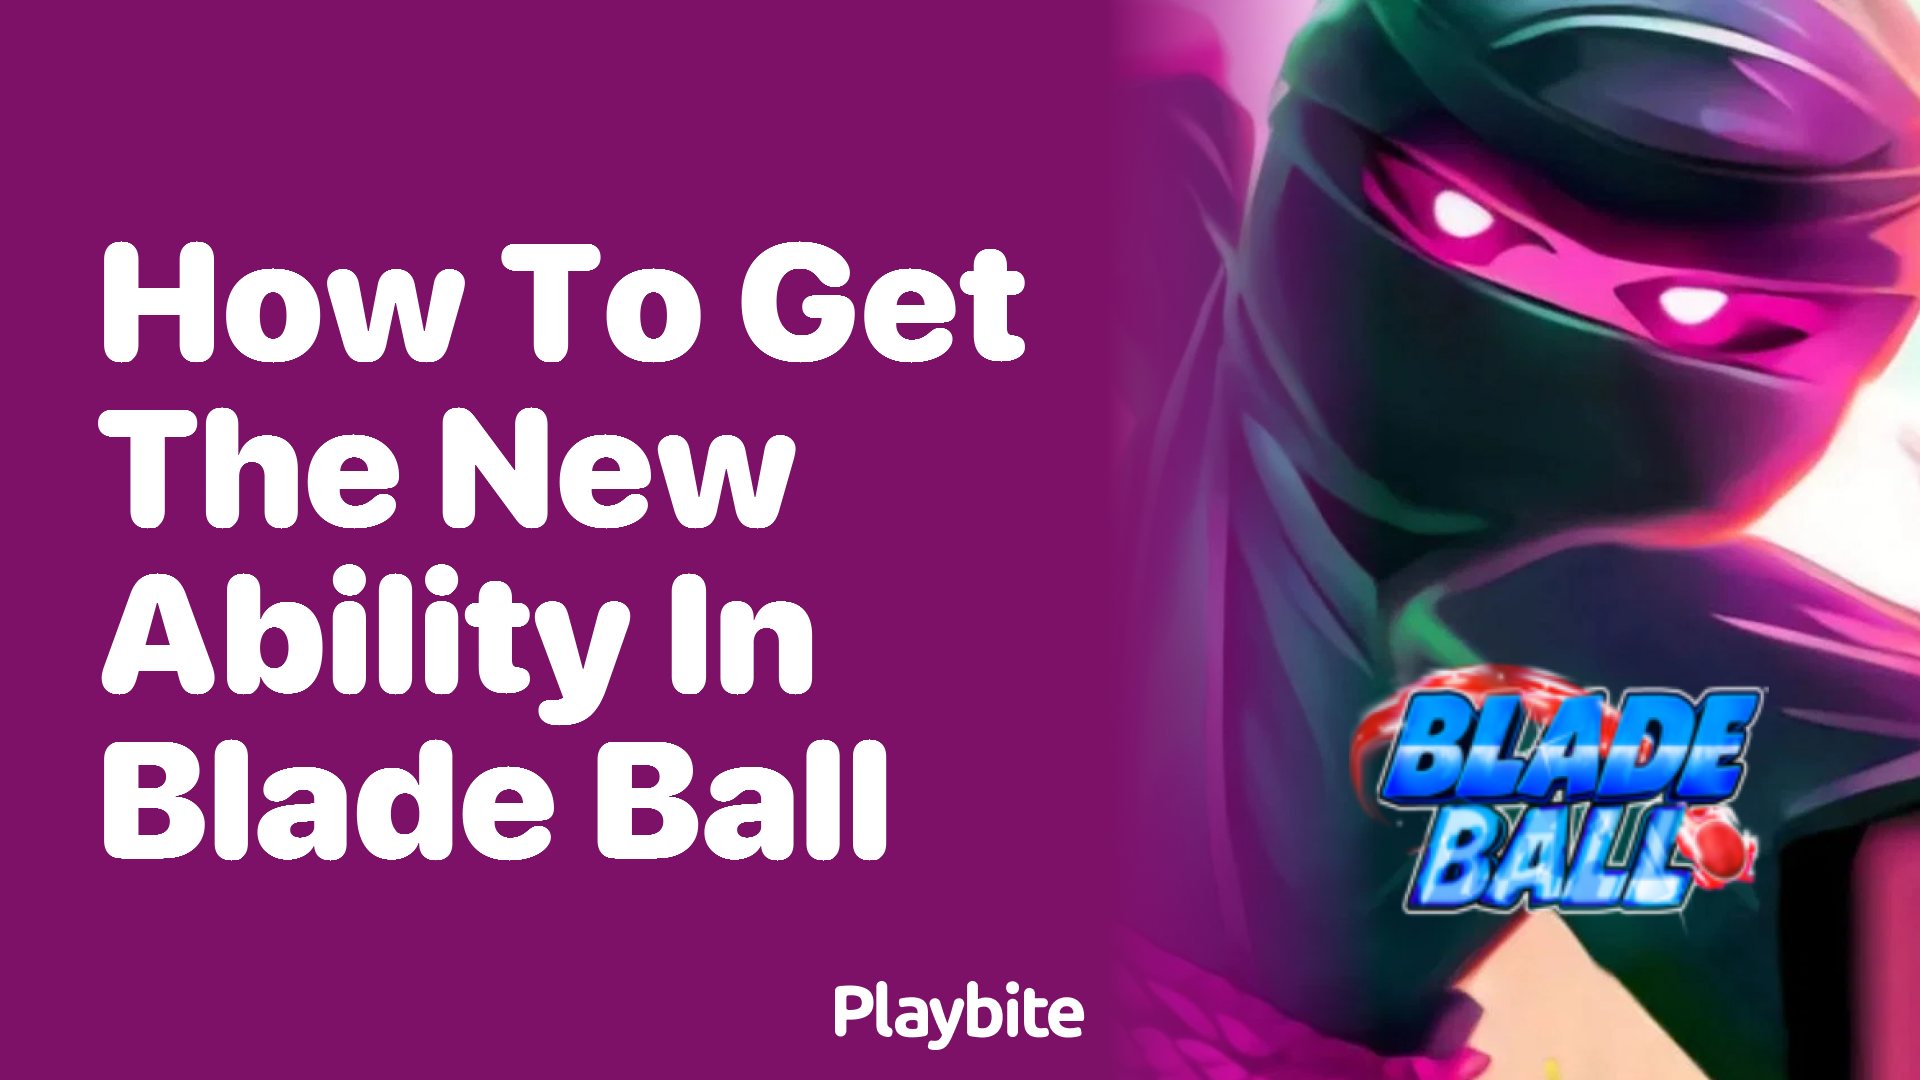 How to Get the New Ability in Blade Ball